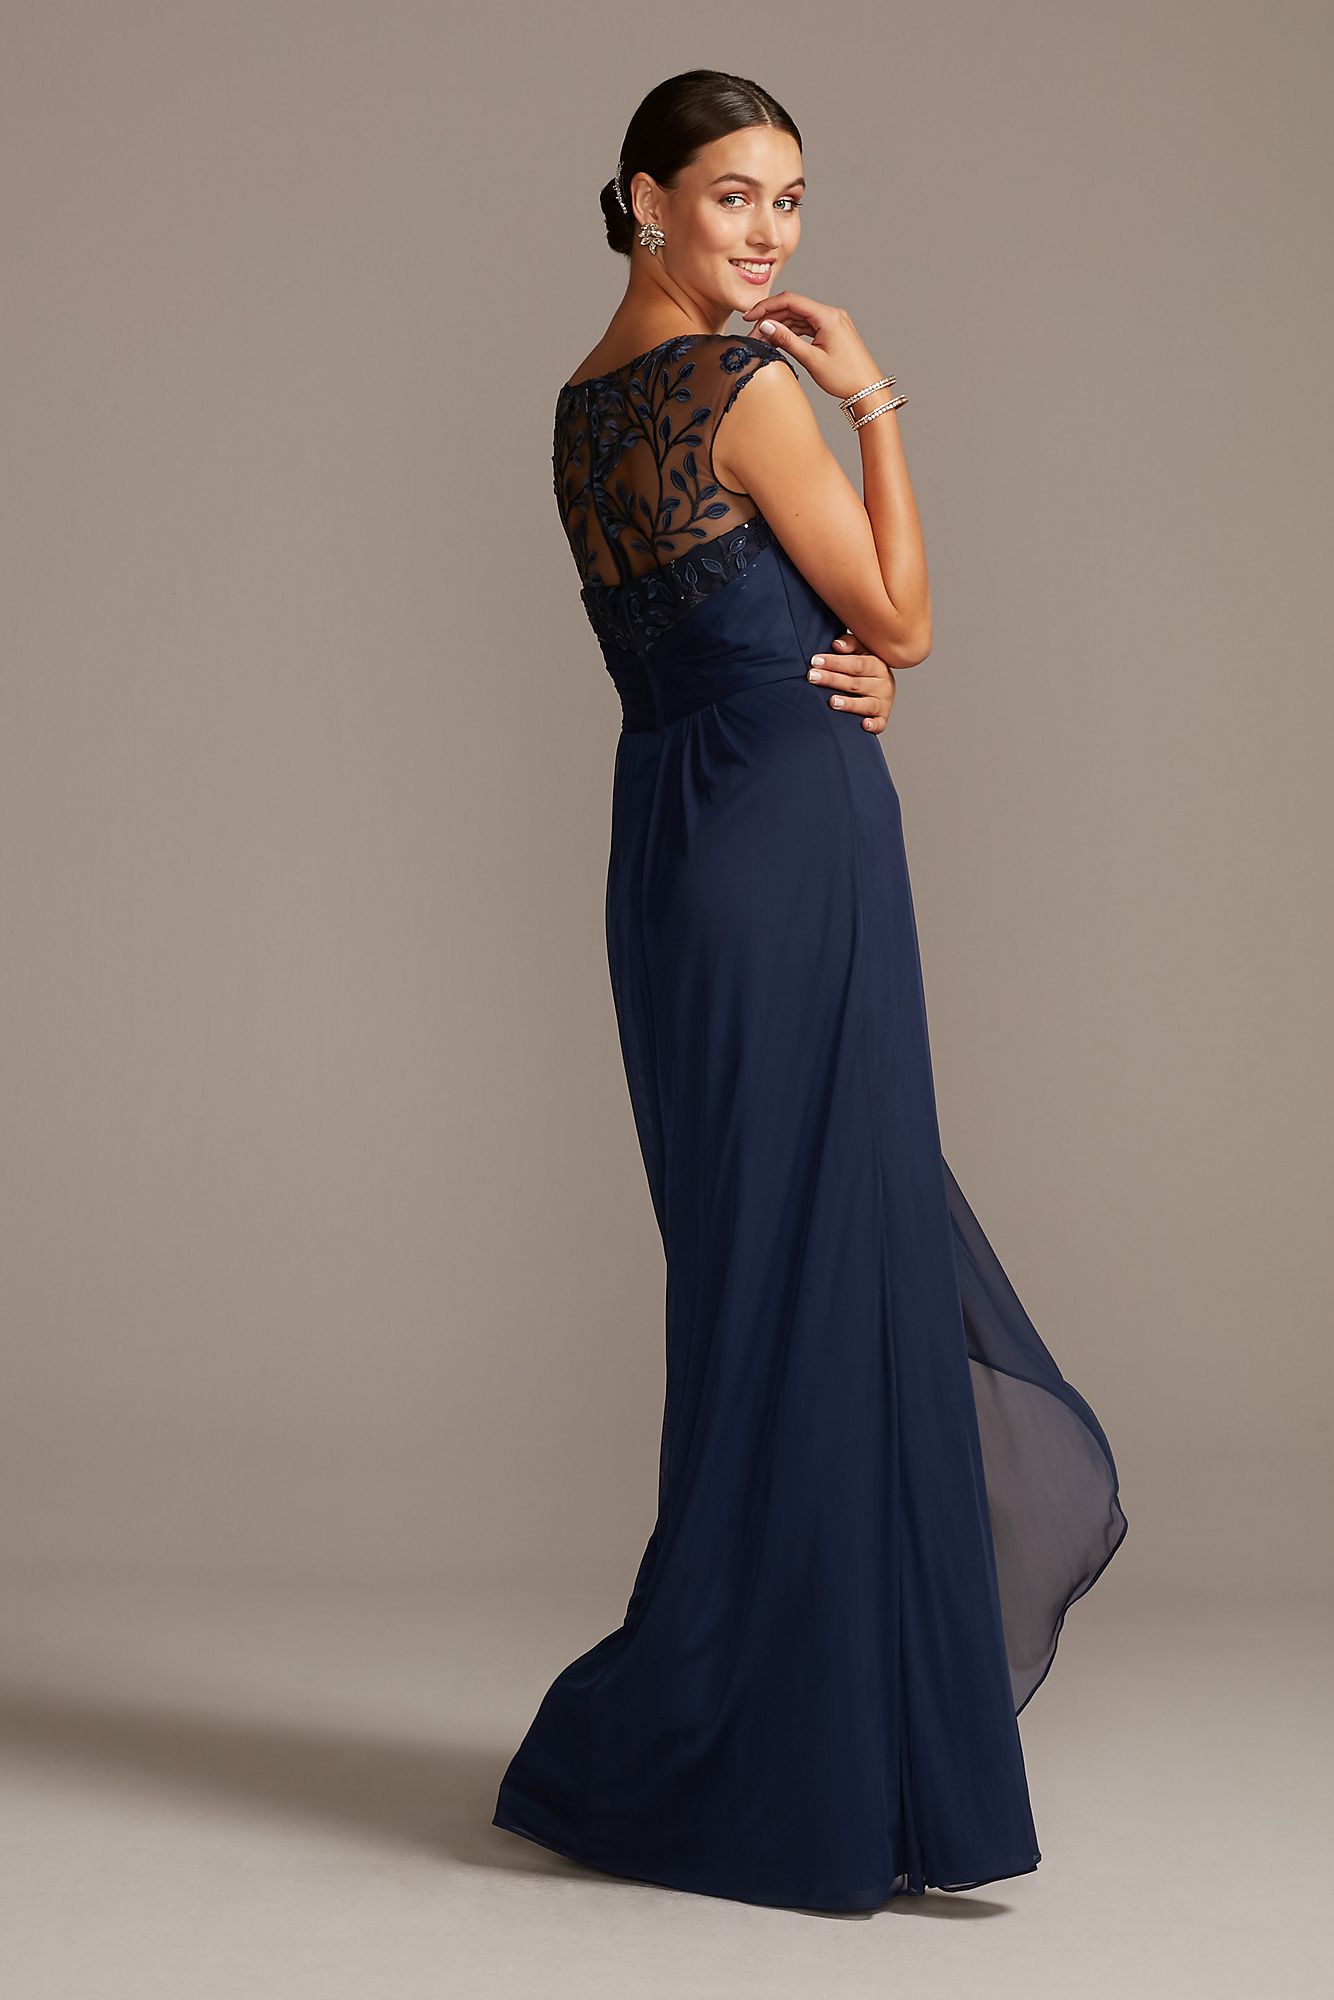 Illusion Embellished Bodice Gown with Cap Sleeves VC1038V2